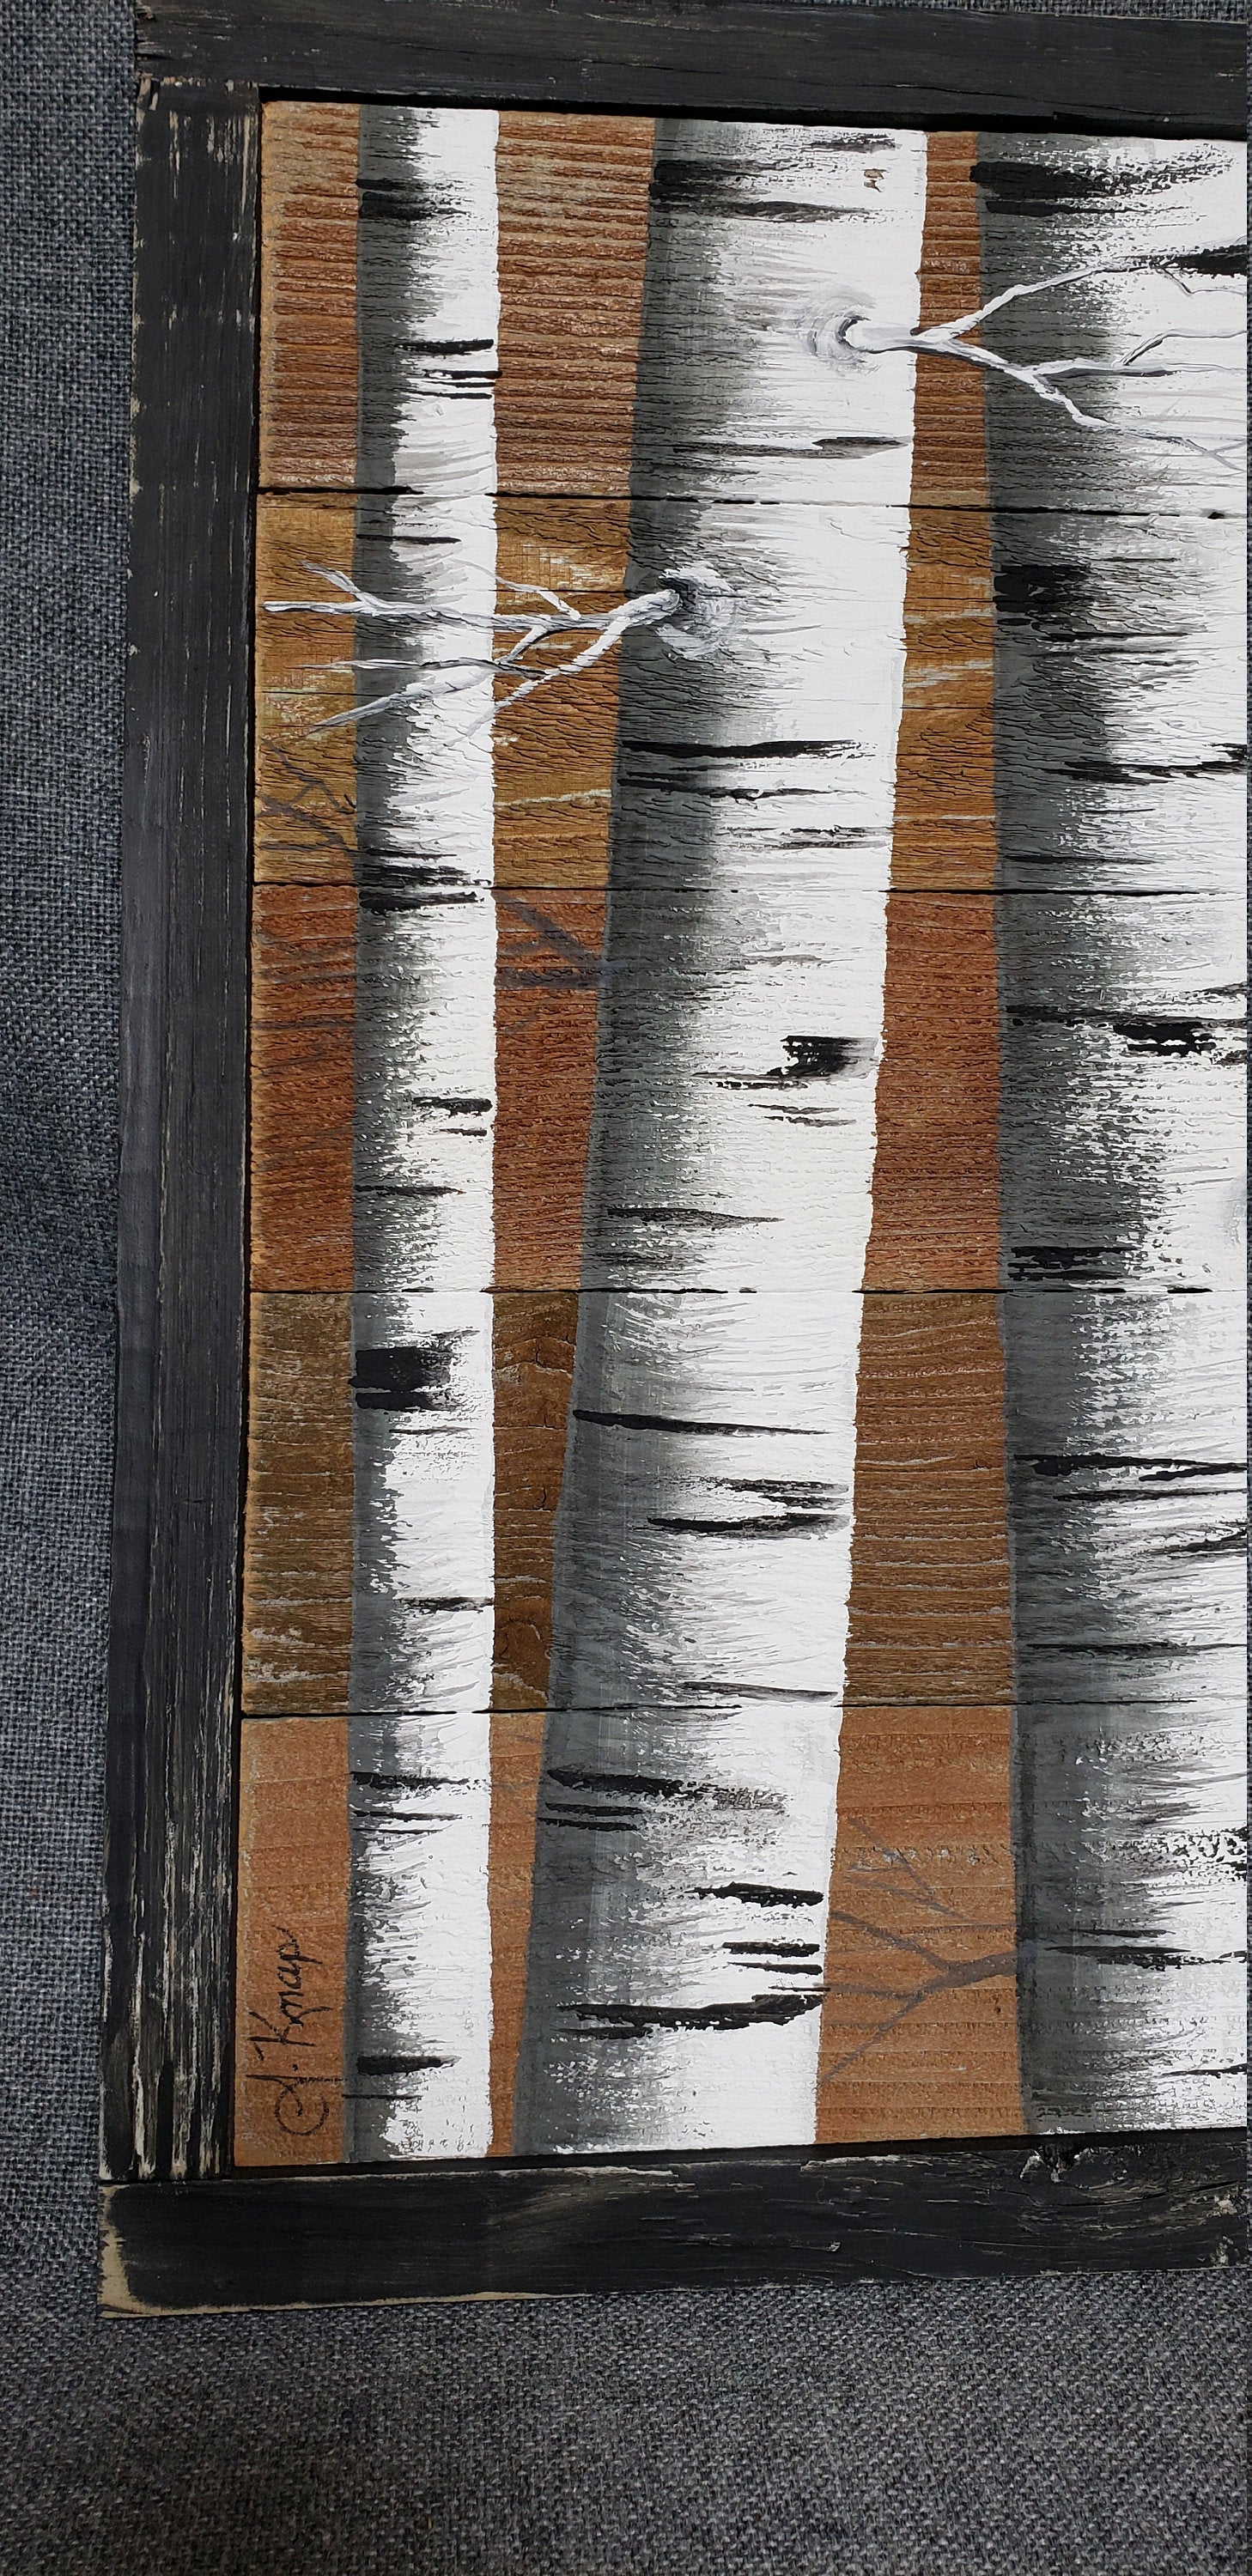 White Birch and Cardinal painting, Visitor from Heaven, Shiplap art, hand painted aspen trees